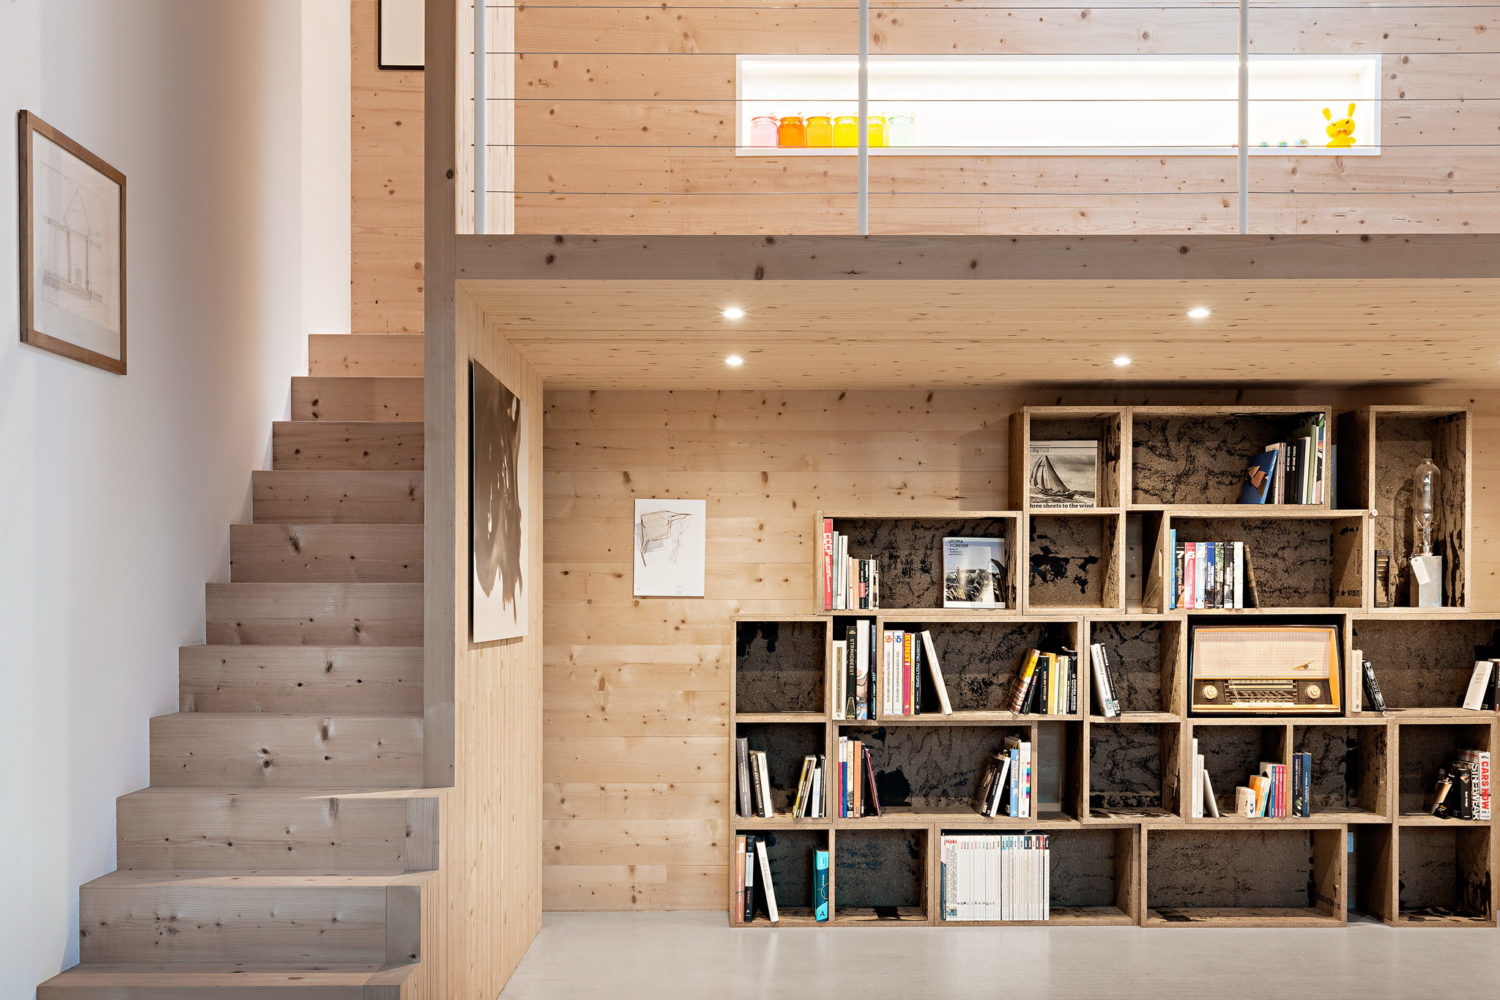 Workshop Renovation by Messner Architects